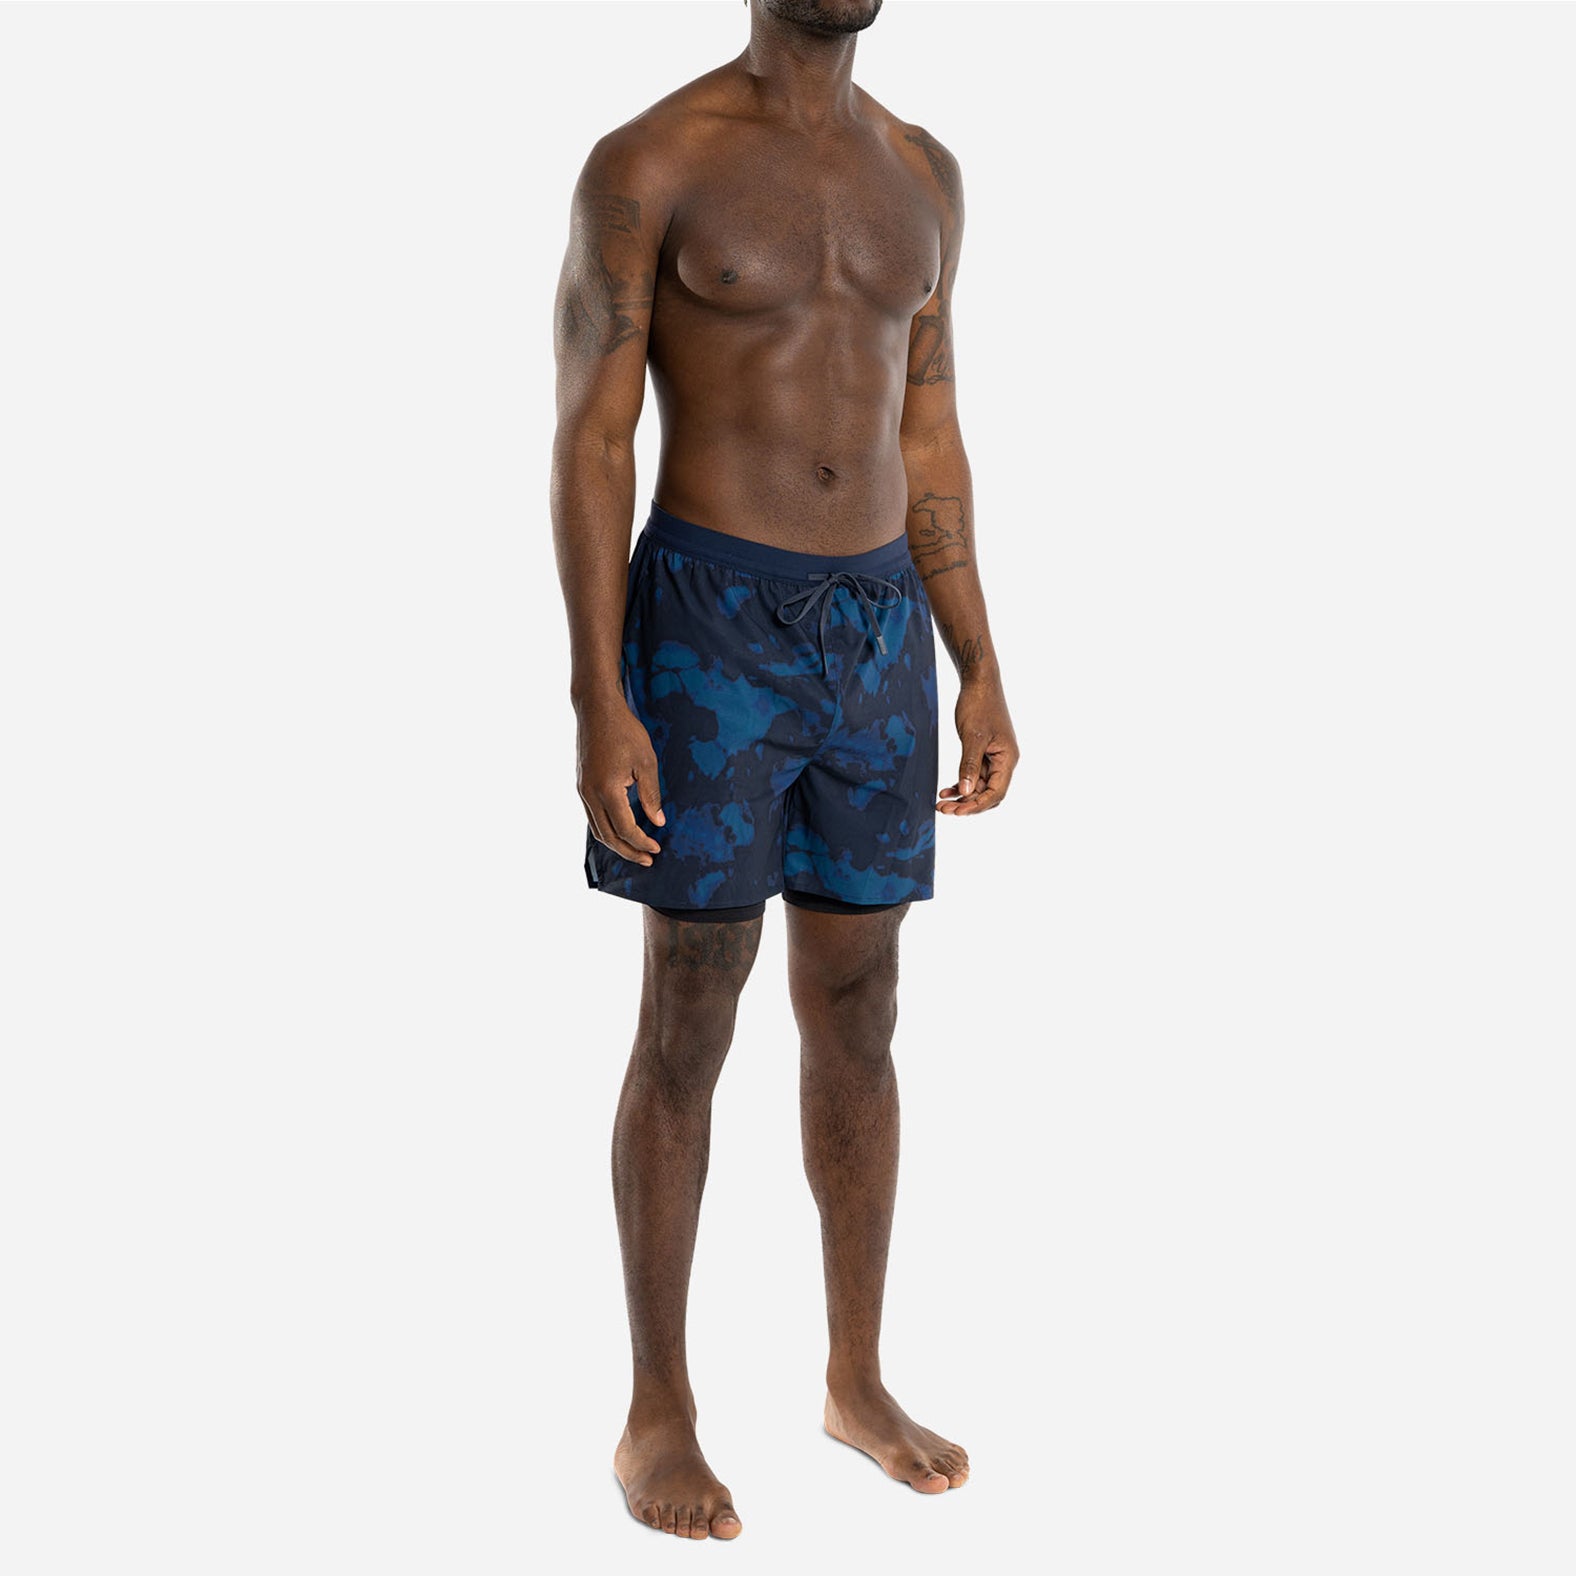 RUNNER'S HIGH 2n1 SHORT: WASHED OUT NAVY